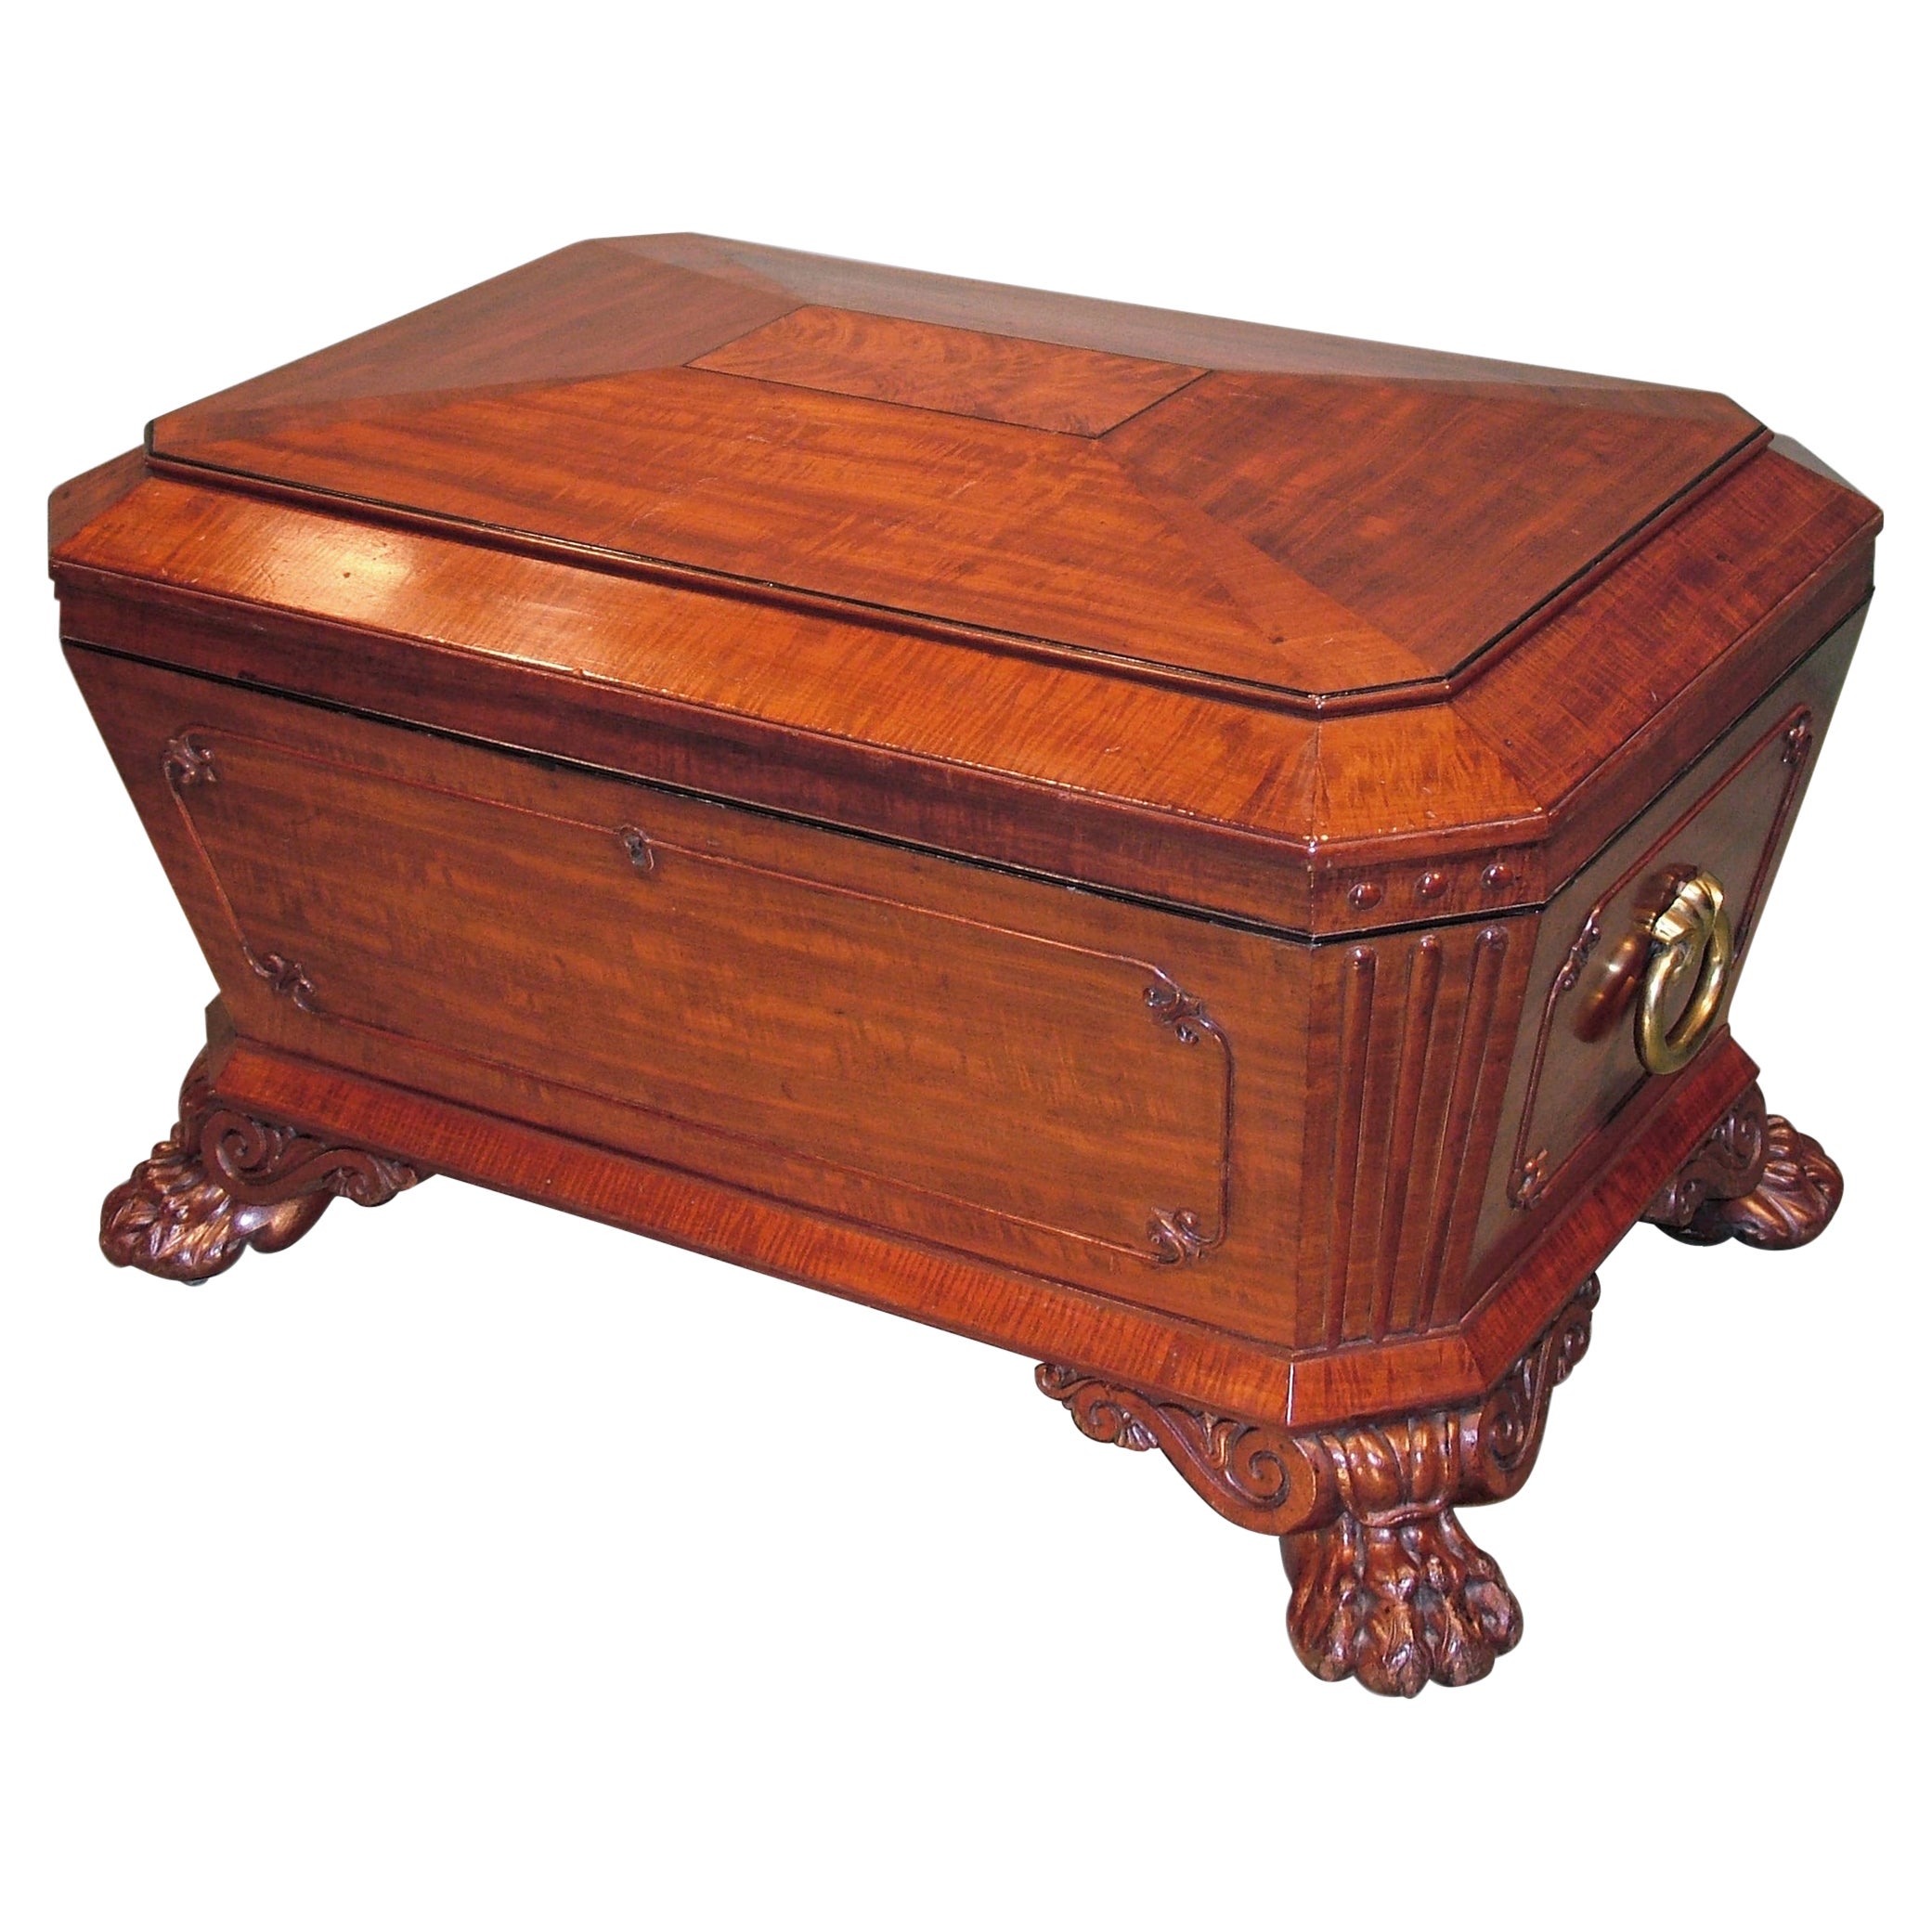 19th Century Regency Mahogany Sarcophagus-Shaped Wine Cooler For Sale